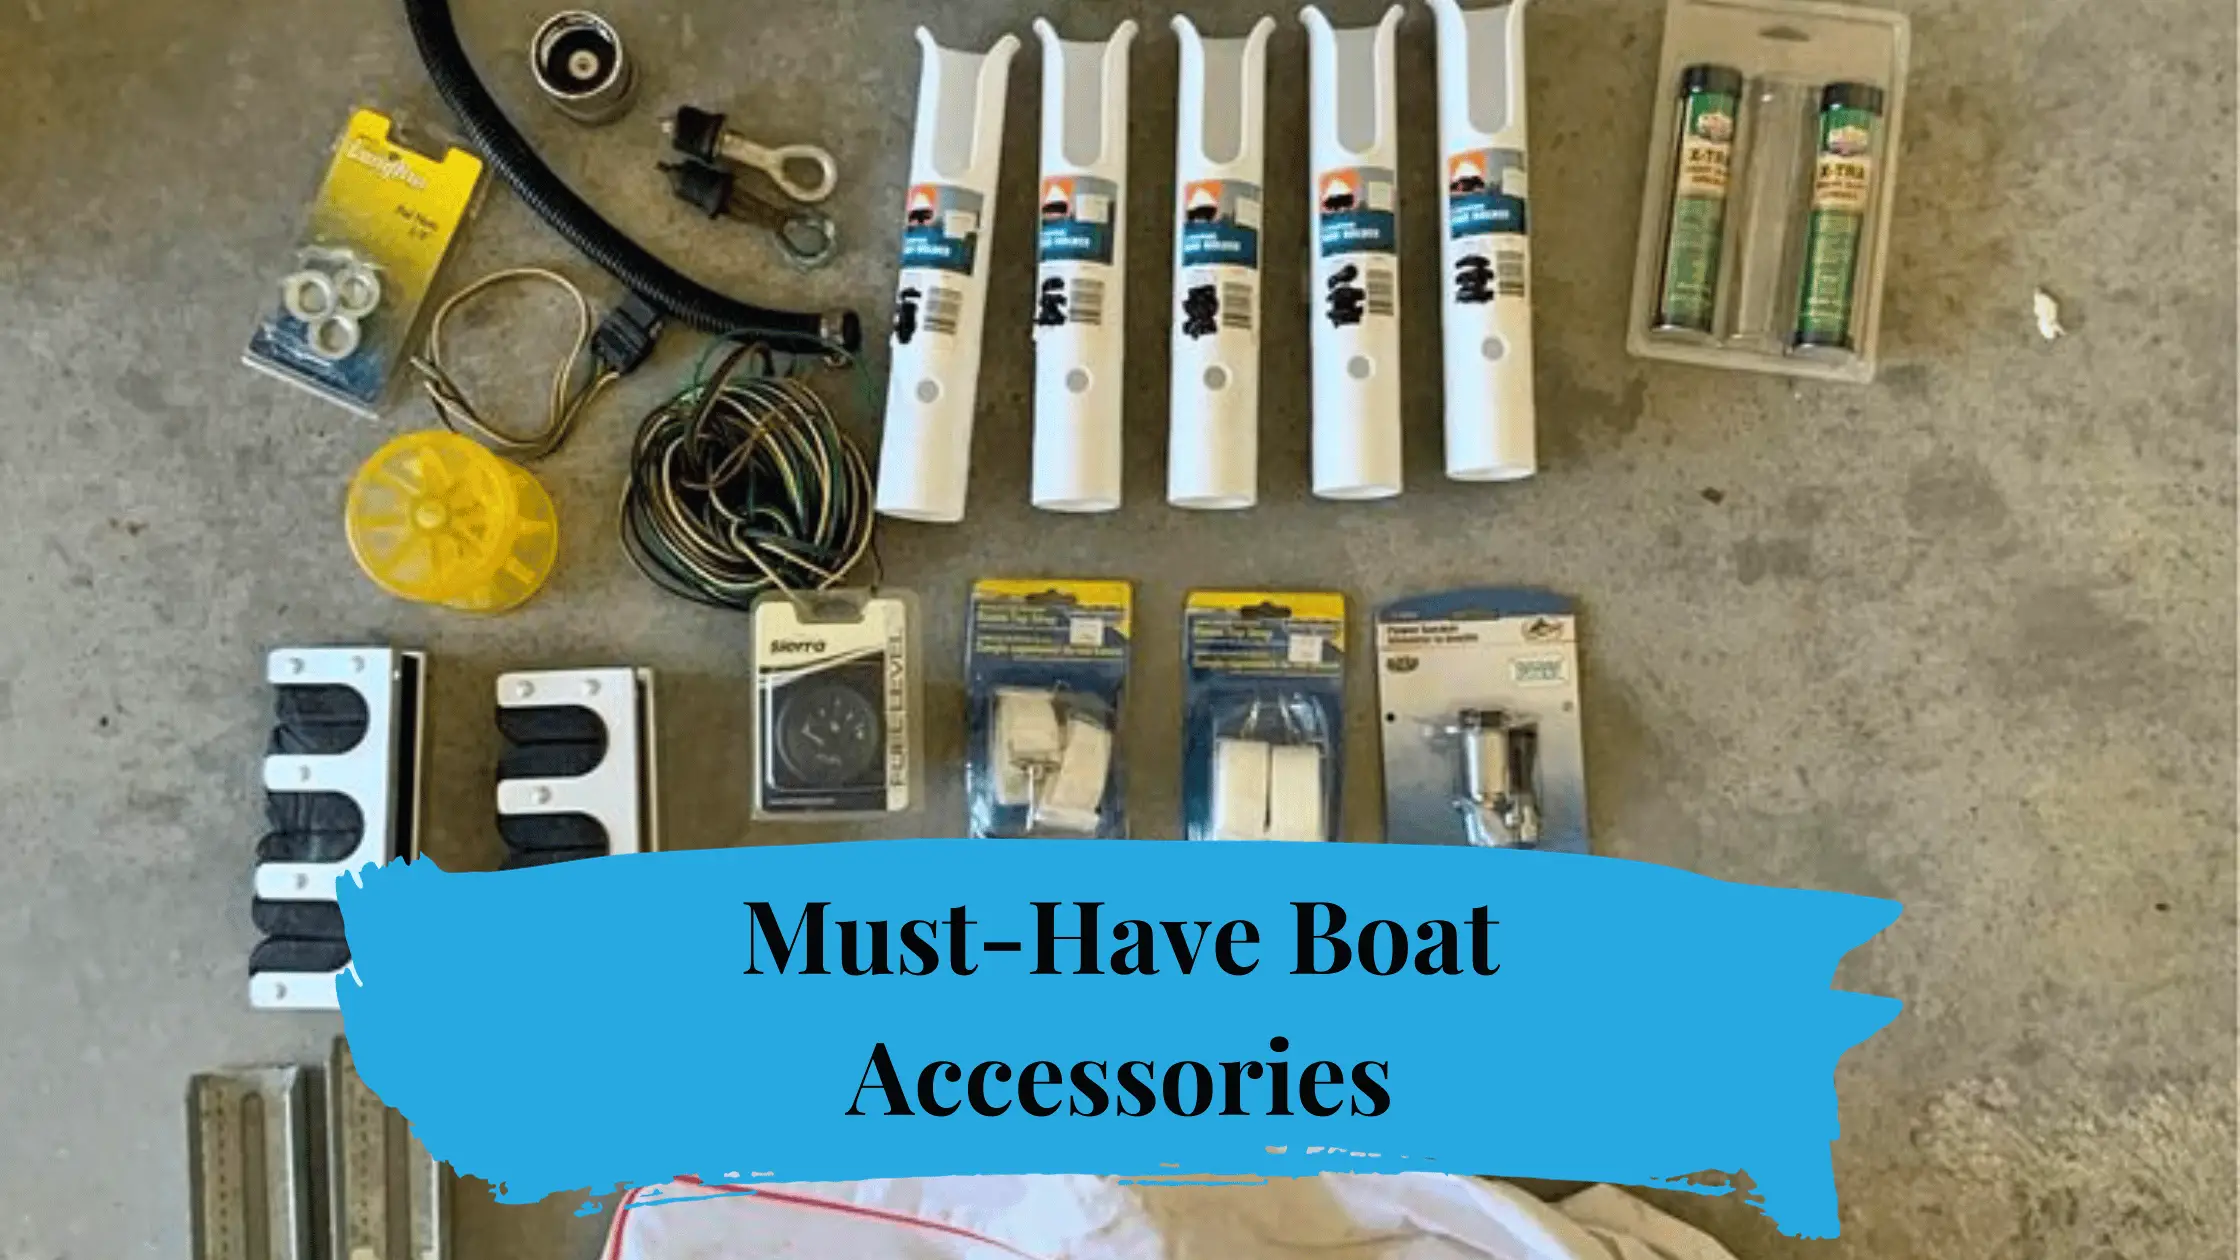 must-have boat accessories